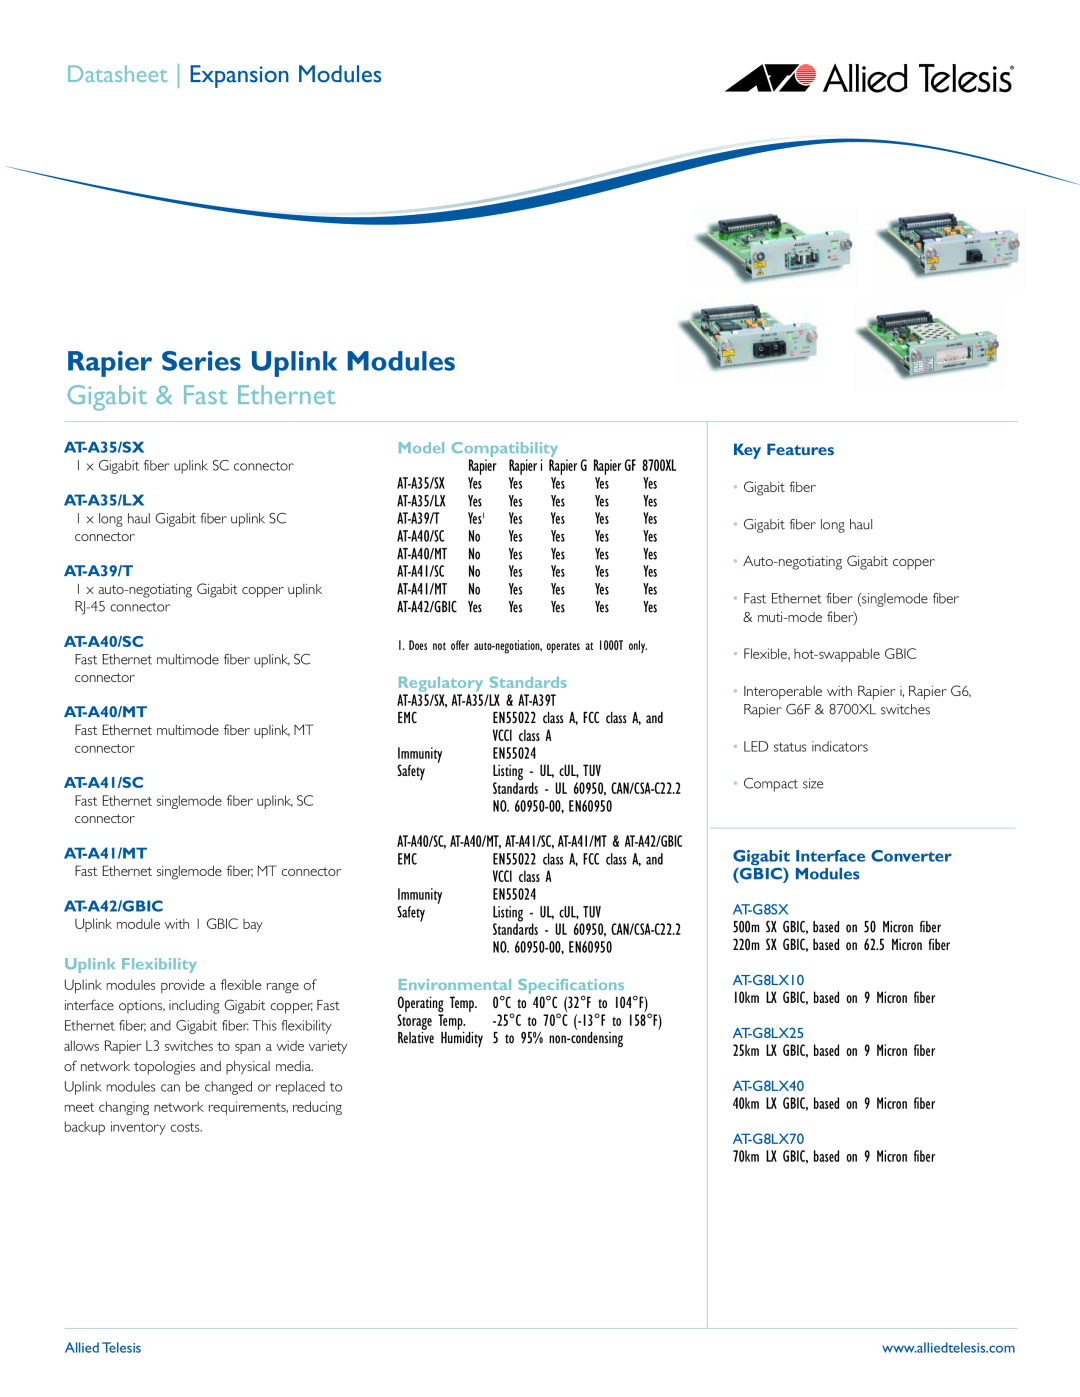 Allied Telesis AT-A35-SX/SC, AT-A40/SC specifications Rapier Series Uplink Modules, Key Features, Gigabit & Fast Ethernet 